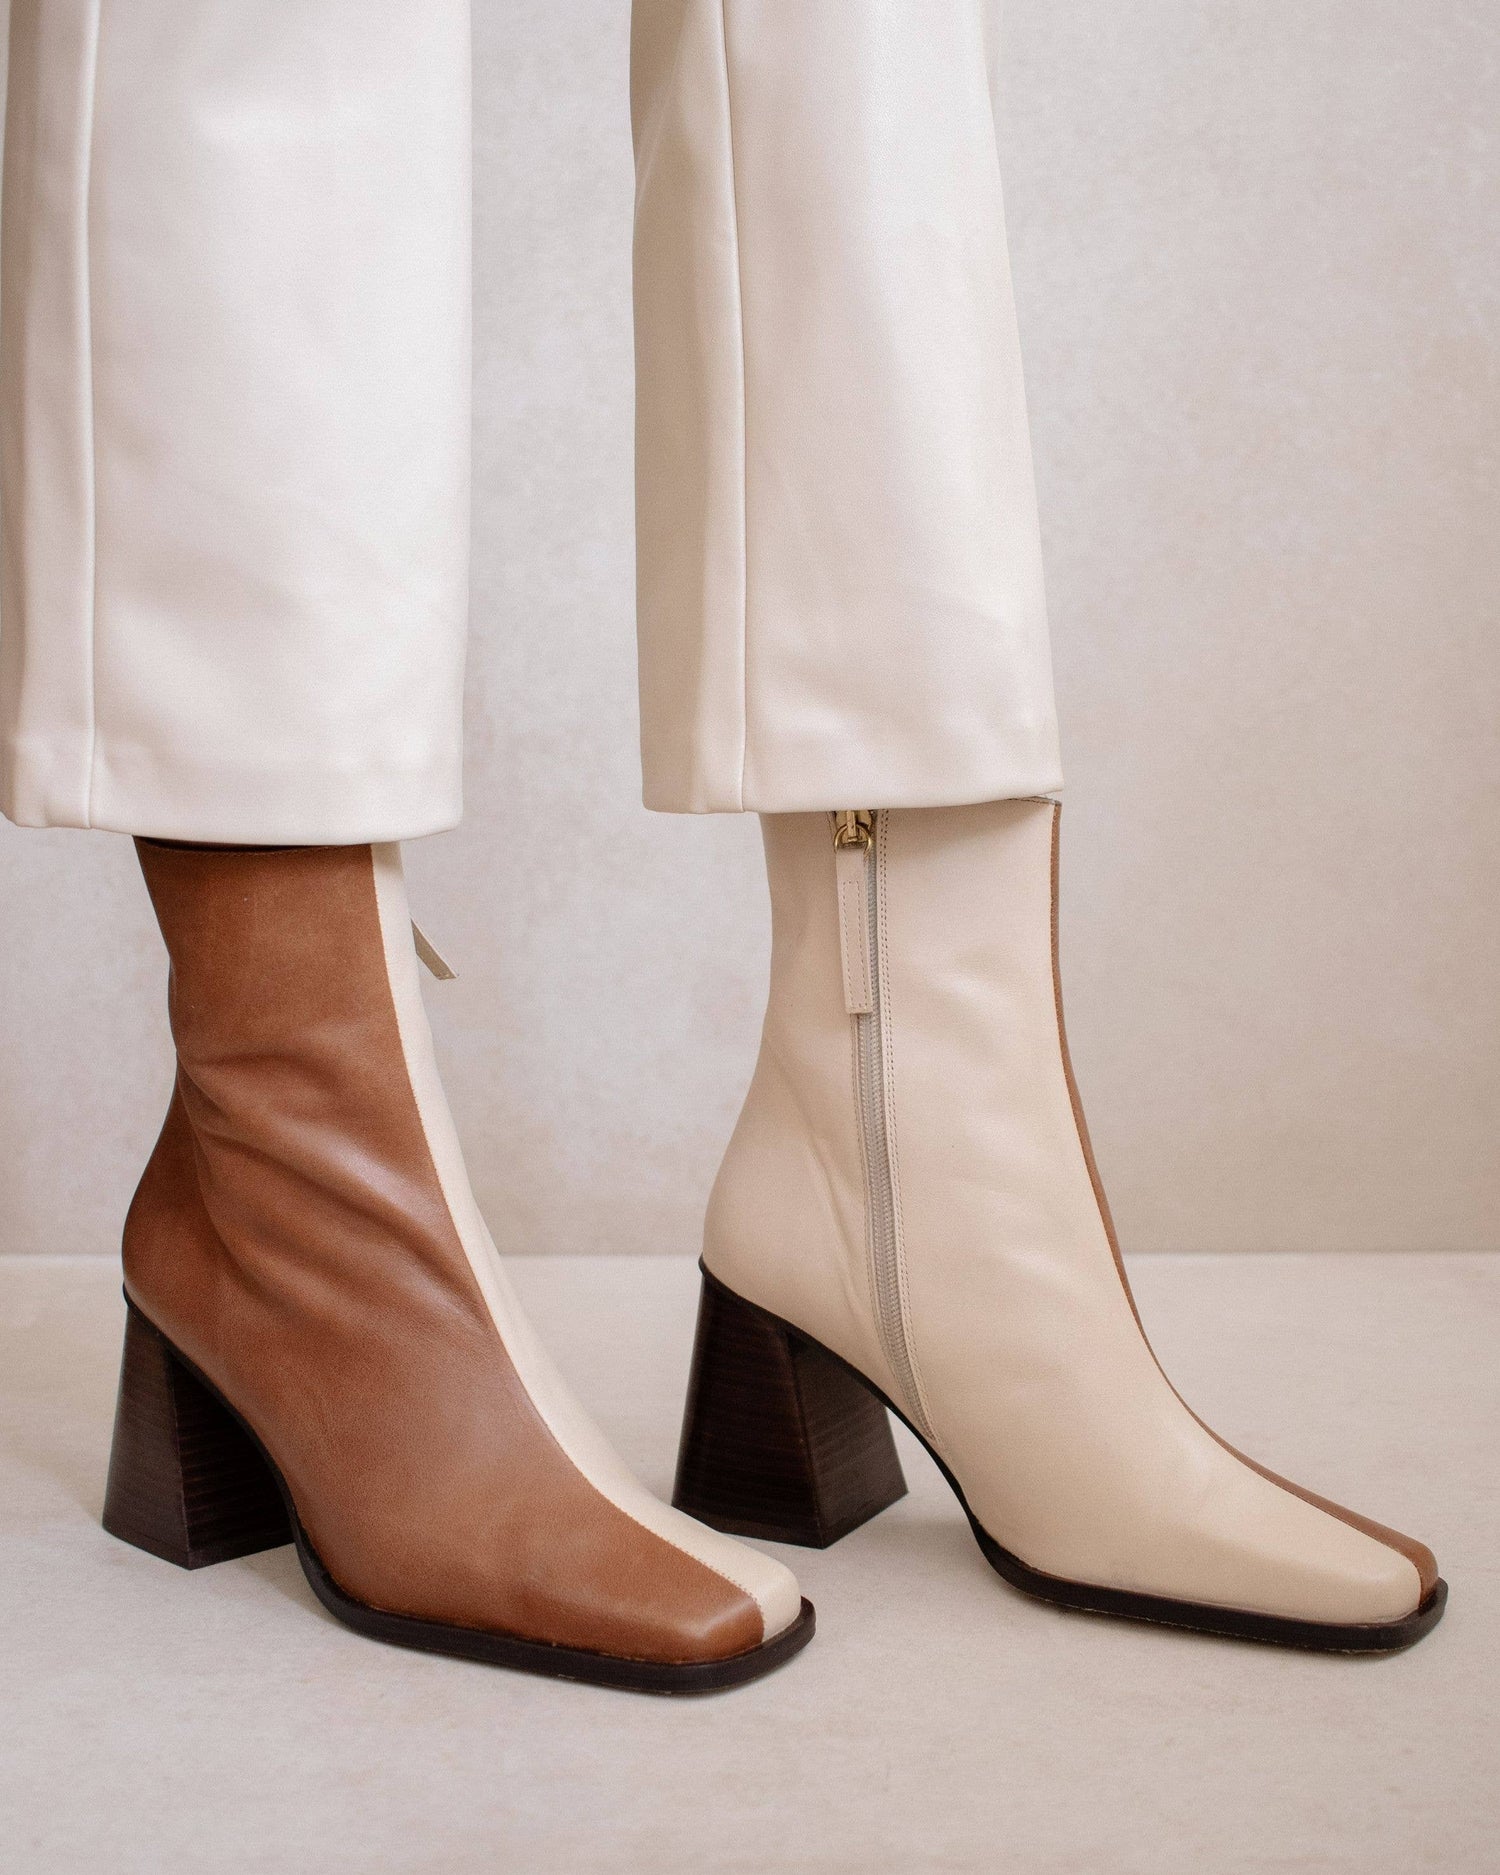 If you don’t know where to go, go South. These sustainable bicolor boots with a block heel give off the ultimate 90s vibes. Sustainably made in Spain.